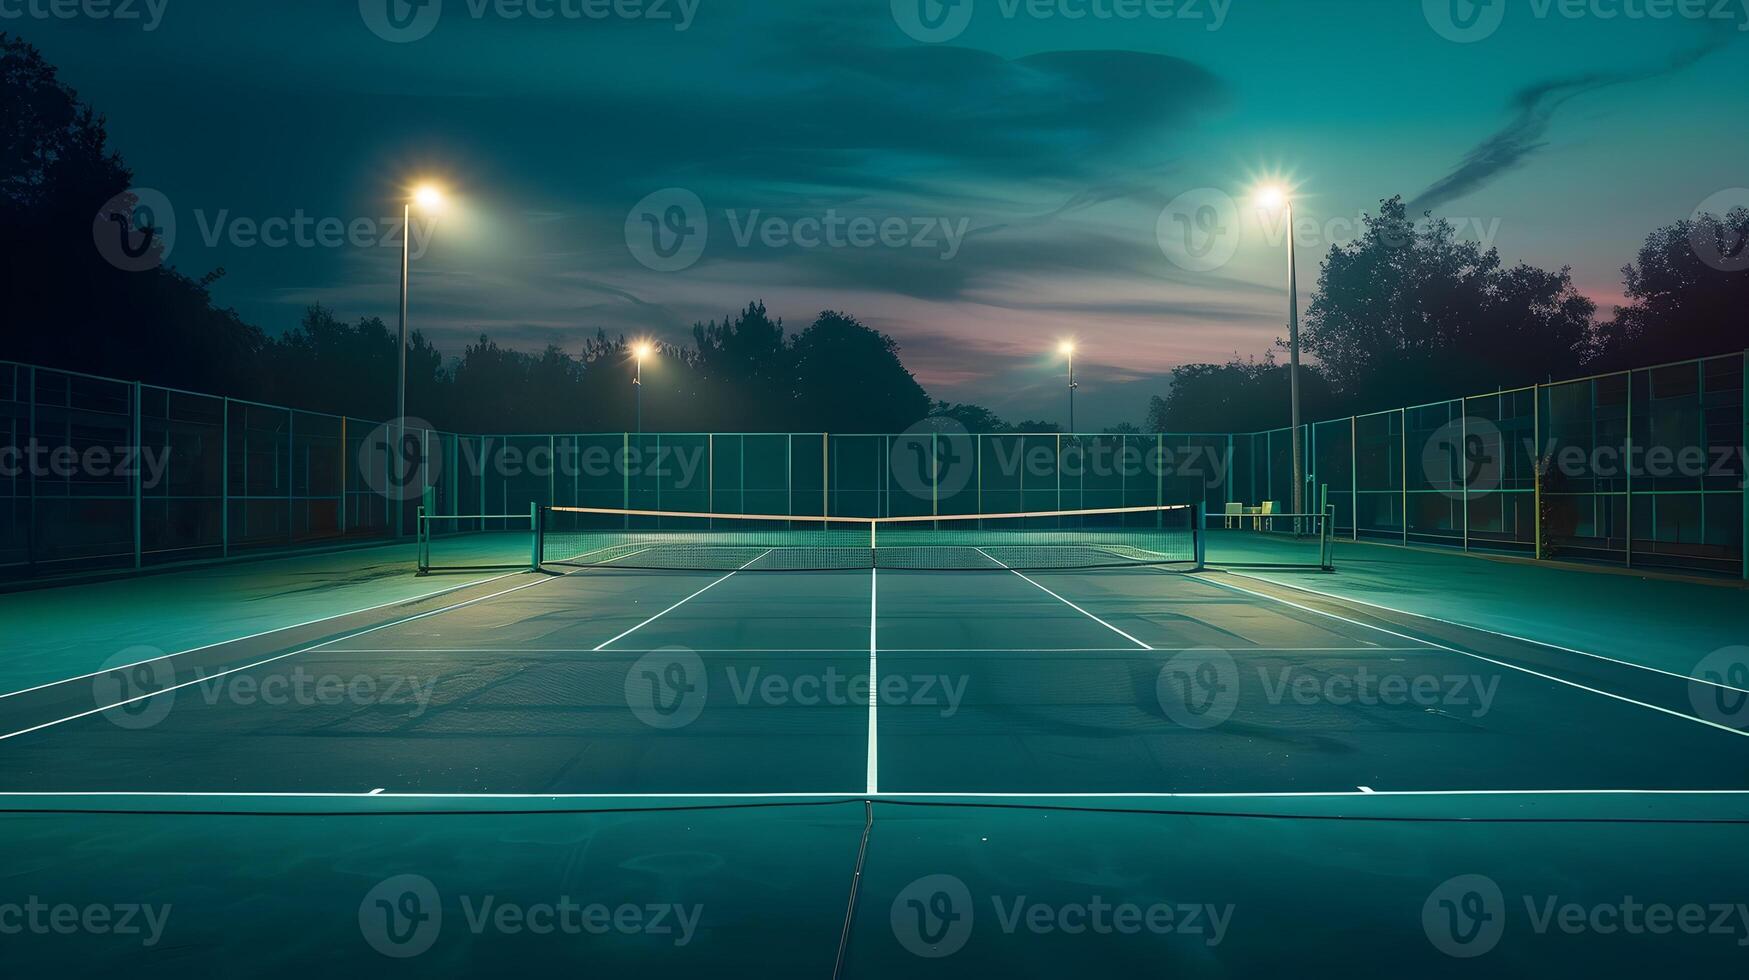 Vintage Lamps Bathe Classic Tennis Court in Soft Glow as Night Falls photo